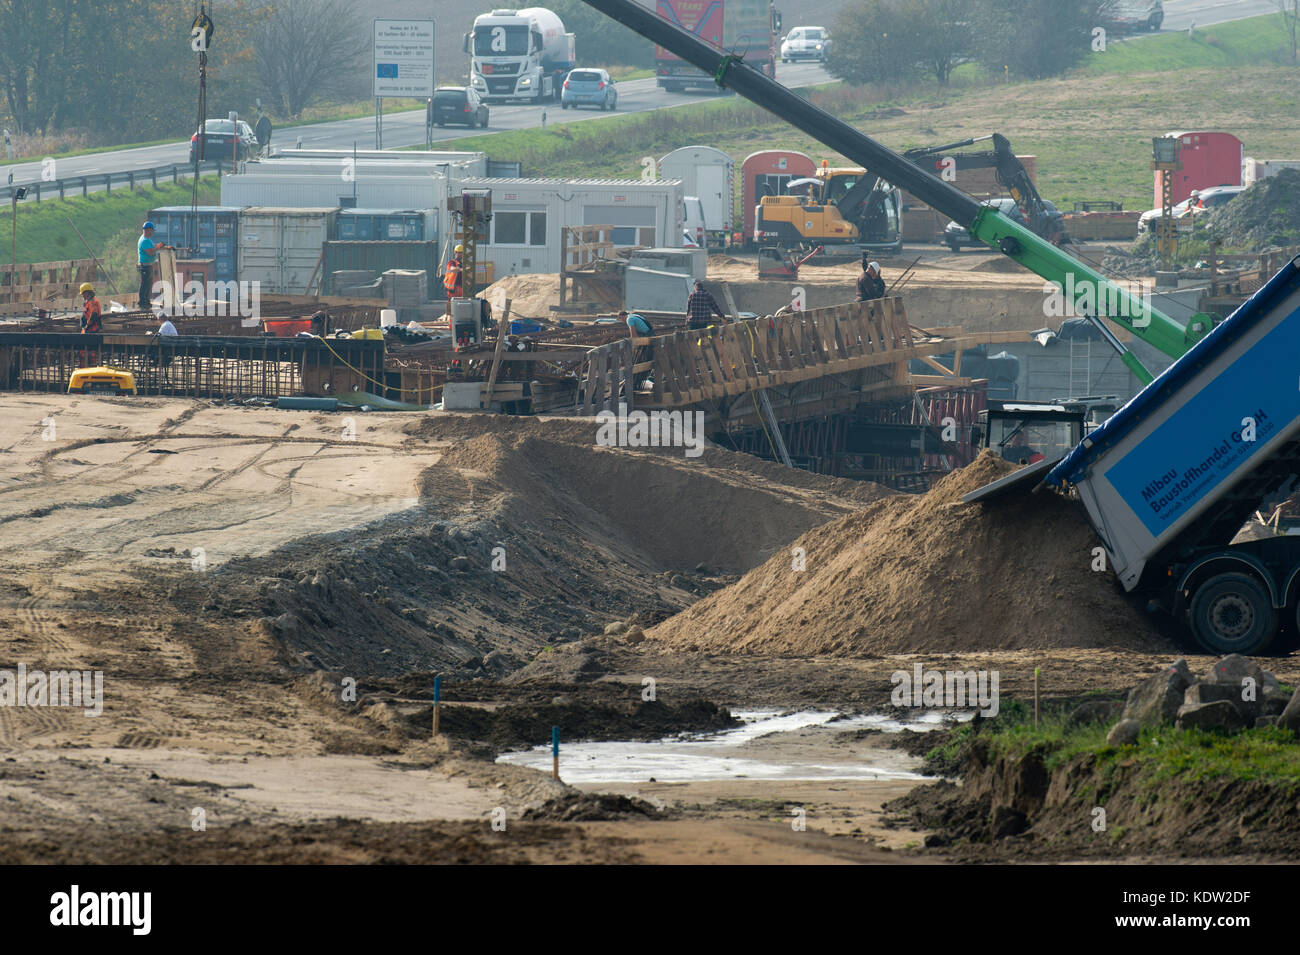 Construction machines are in operation during the foundation works of a new bridge across the Sehrowbach stream for the junction of the new federal highway B96 near Samtens, Germany, 16 October 2017. The section is ment to lead from Samtens to Bergen and thereby eliminate traffic bottlenecks. Moreover, it is ment to better connect the island to the transeuropean traffic network with the motorway A20. The construction began during summer 2016. Altogether around 55.6 million euros have been approved for the works. By June of 2019 the construction works are ment to be completed. Photo: Stefan Sau Stock Photo